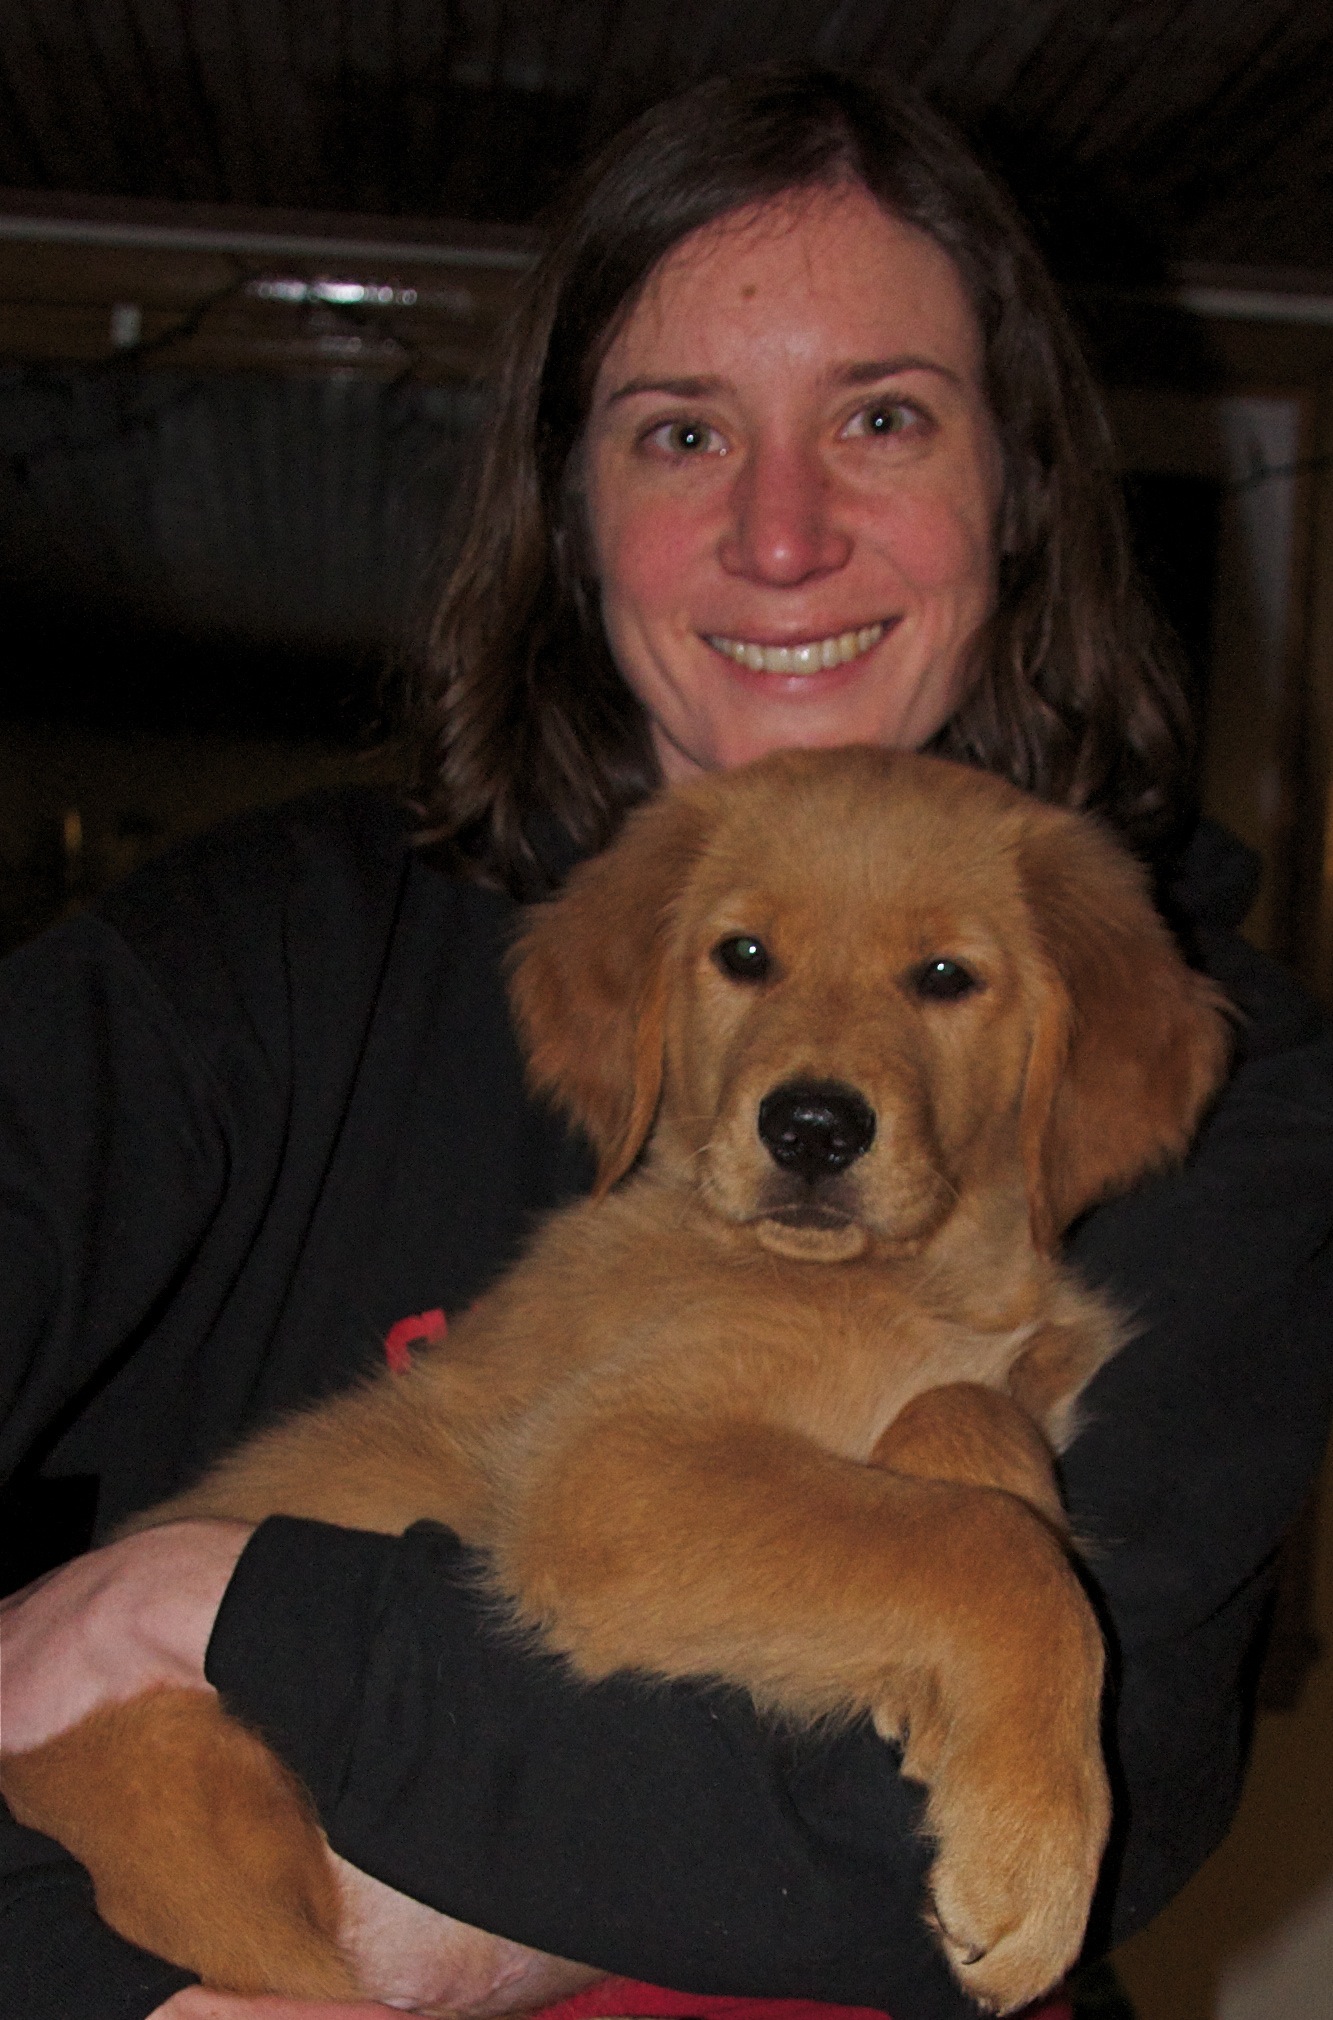 Jessica Hayward holds a golden retriever puppy in her lap